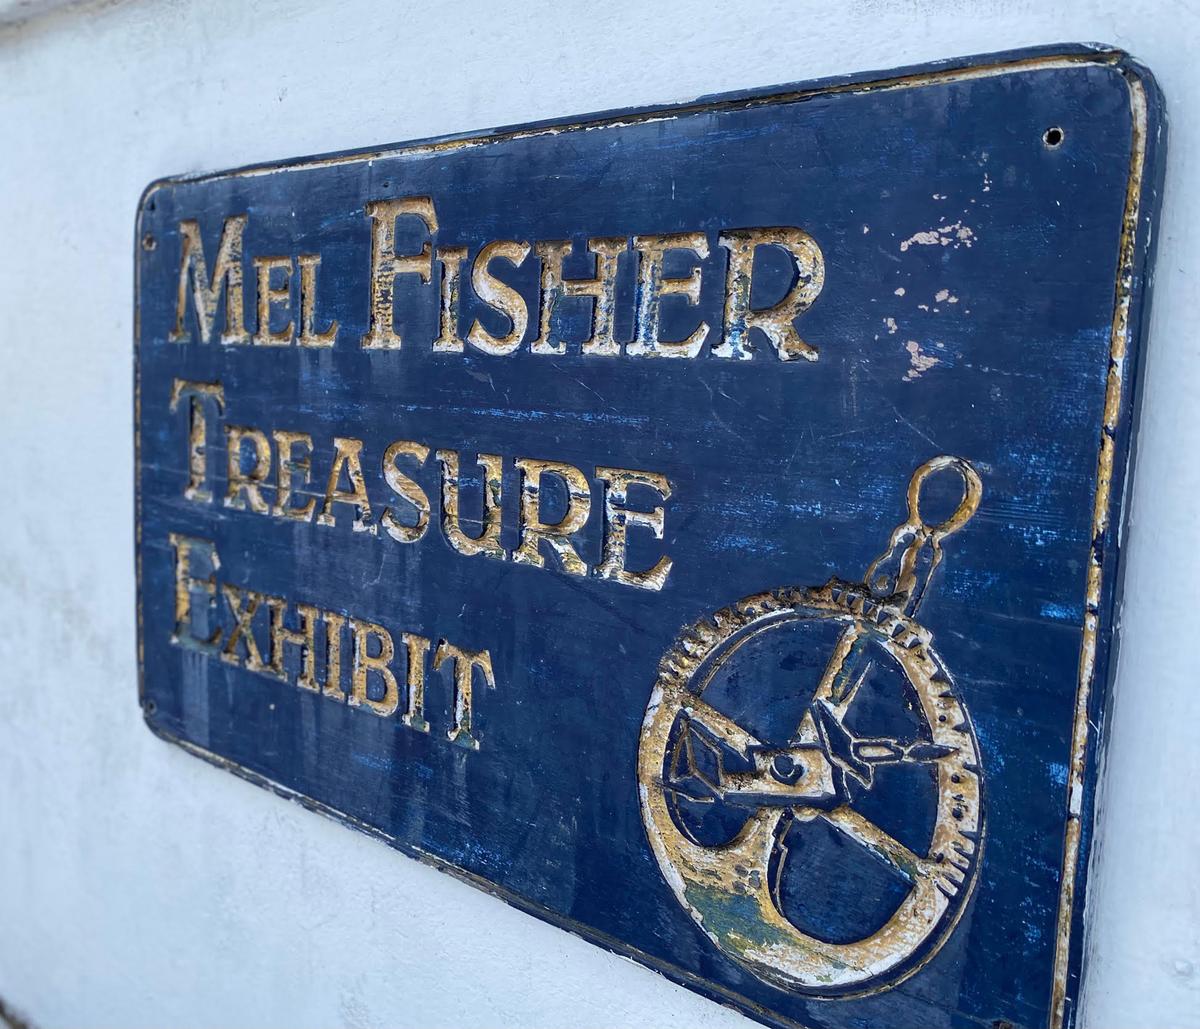 The Mel Fisher Maritme Museum is named after one of the most famous shipwreck treasure hunters. (Gwen Filosa/Florida Keys News/Miami Herald/TNS)